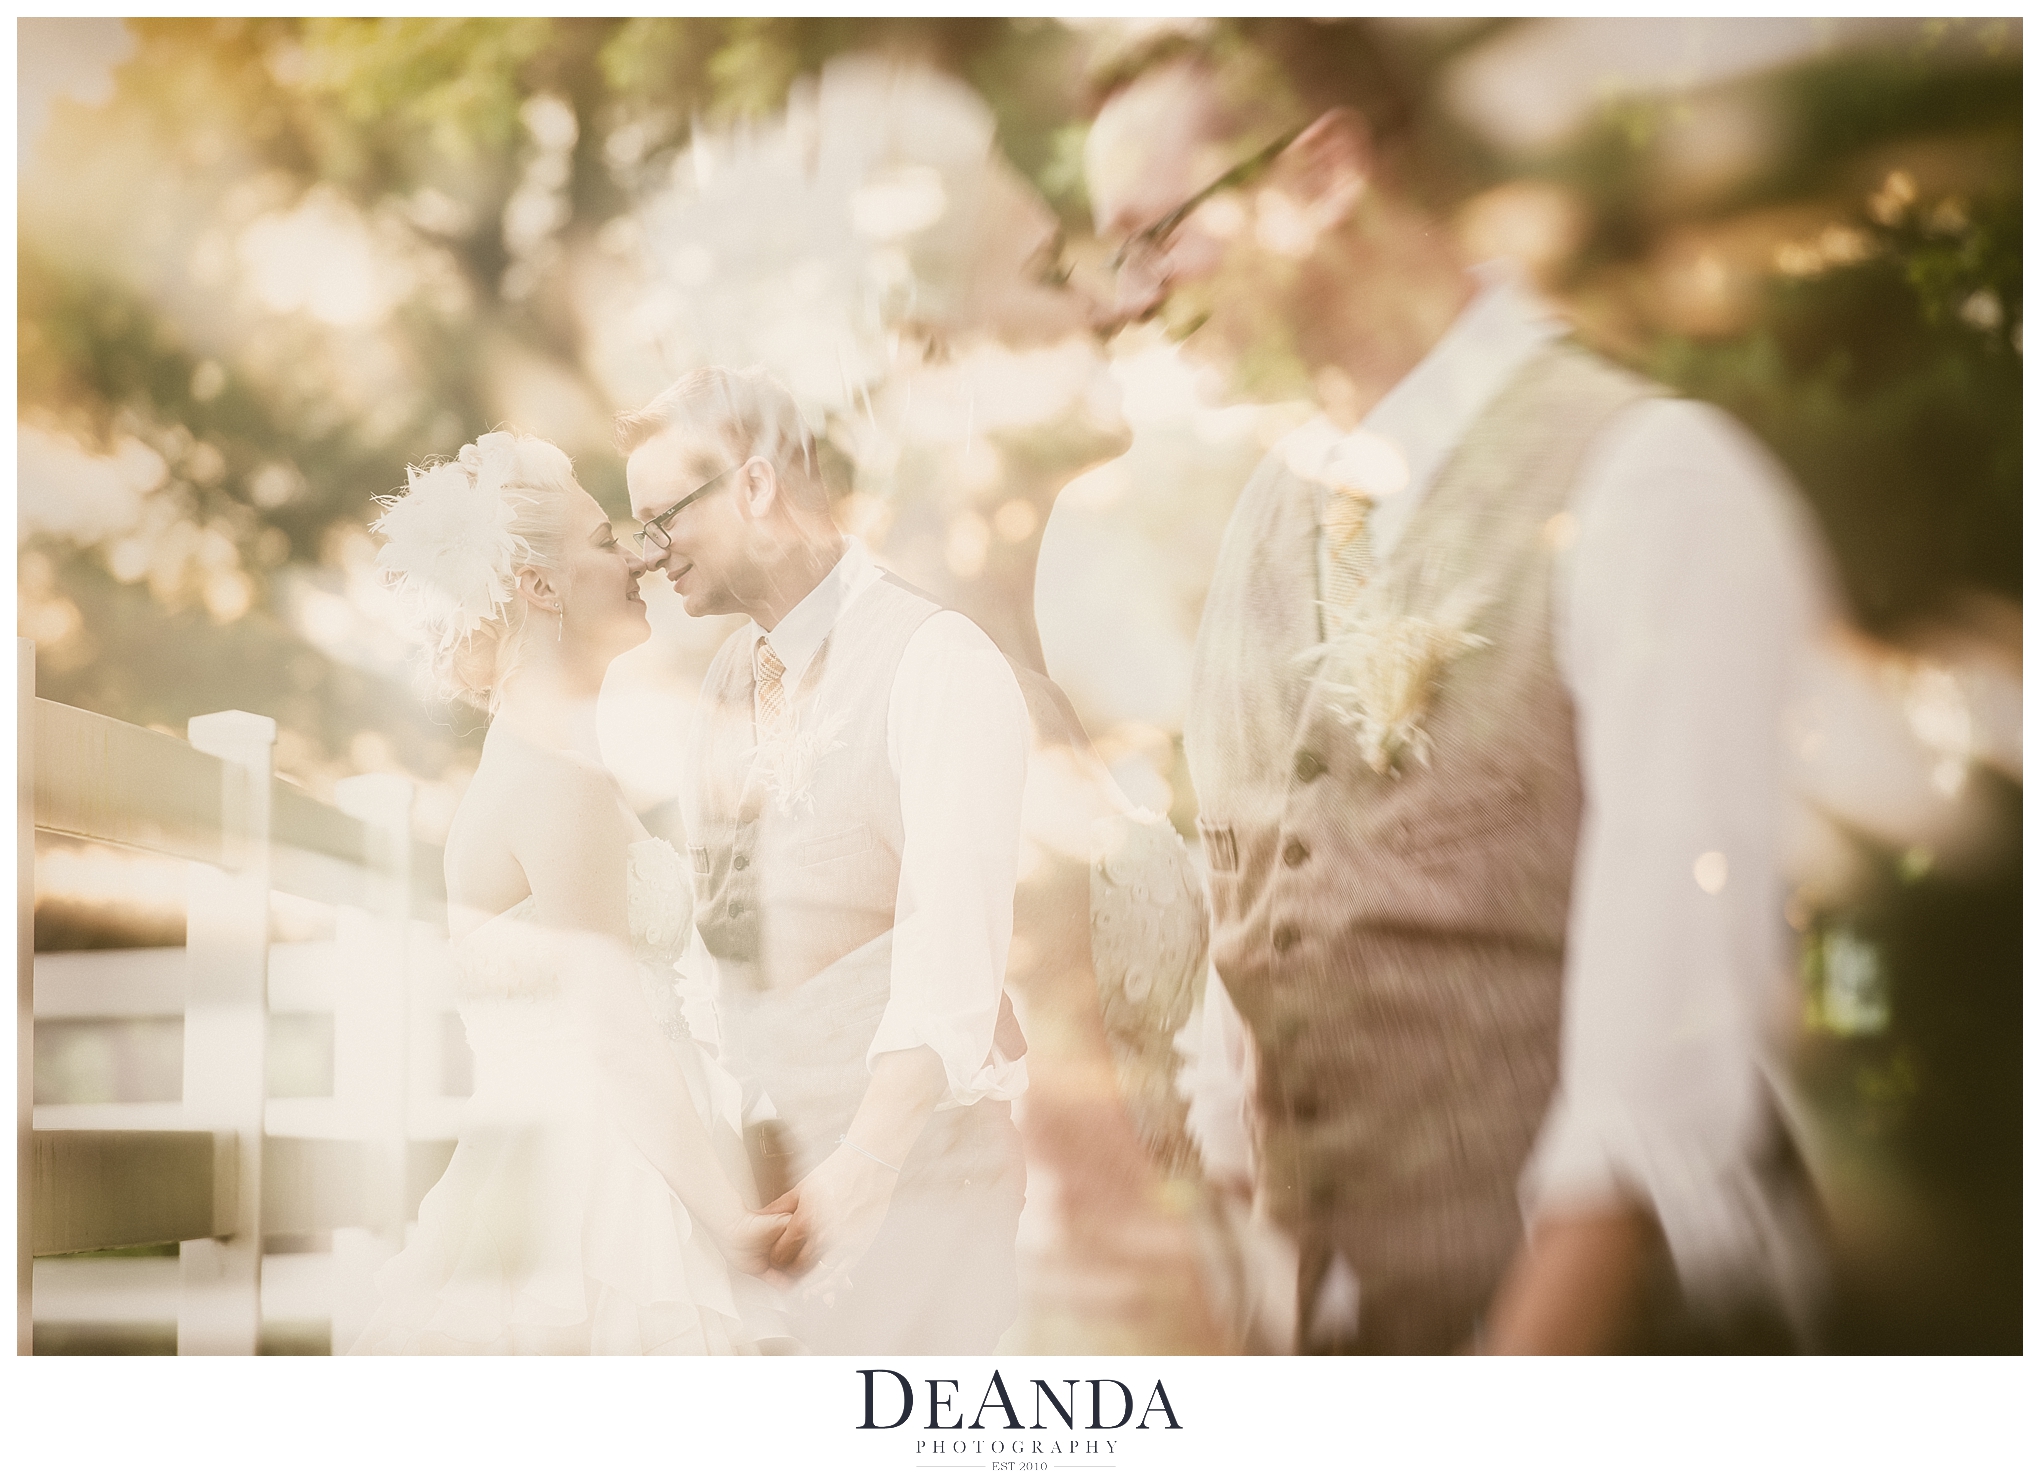 Double Exposure Image of bride and groom